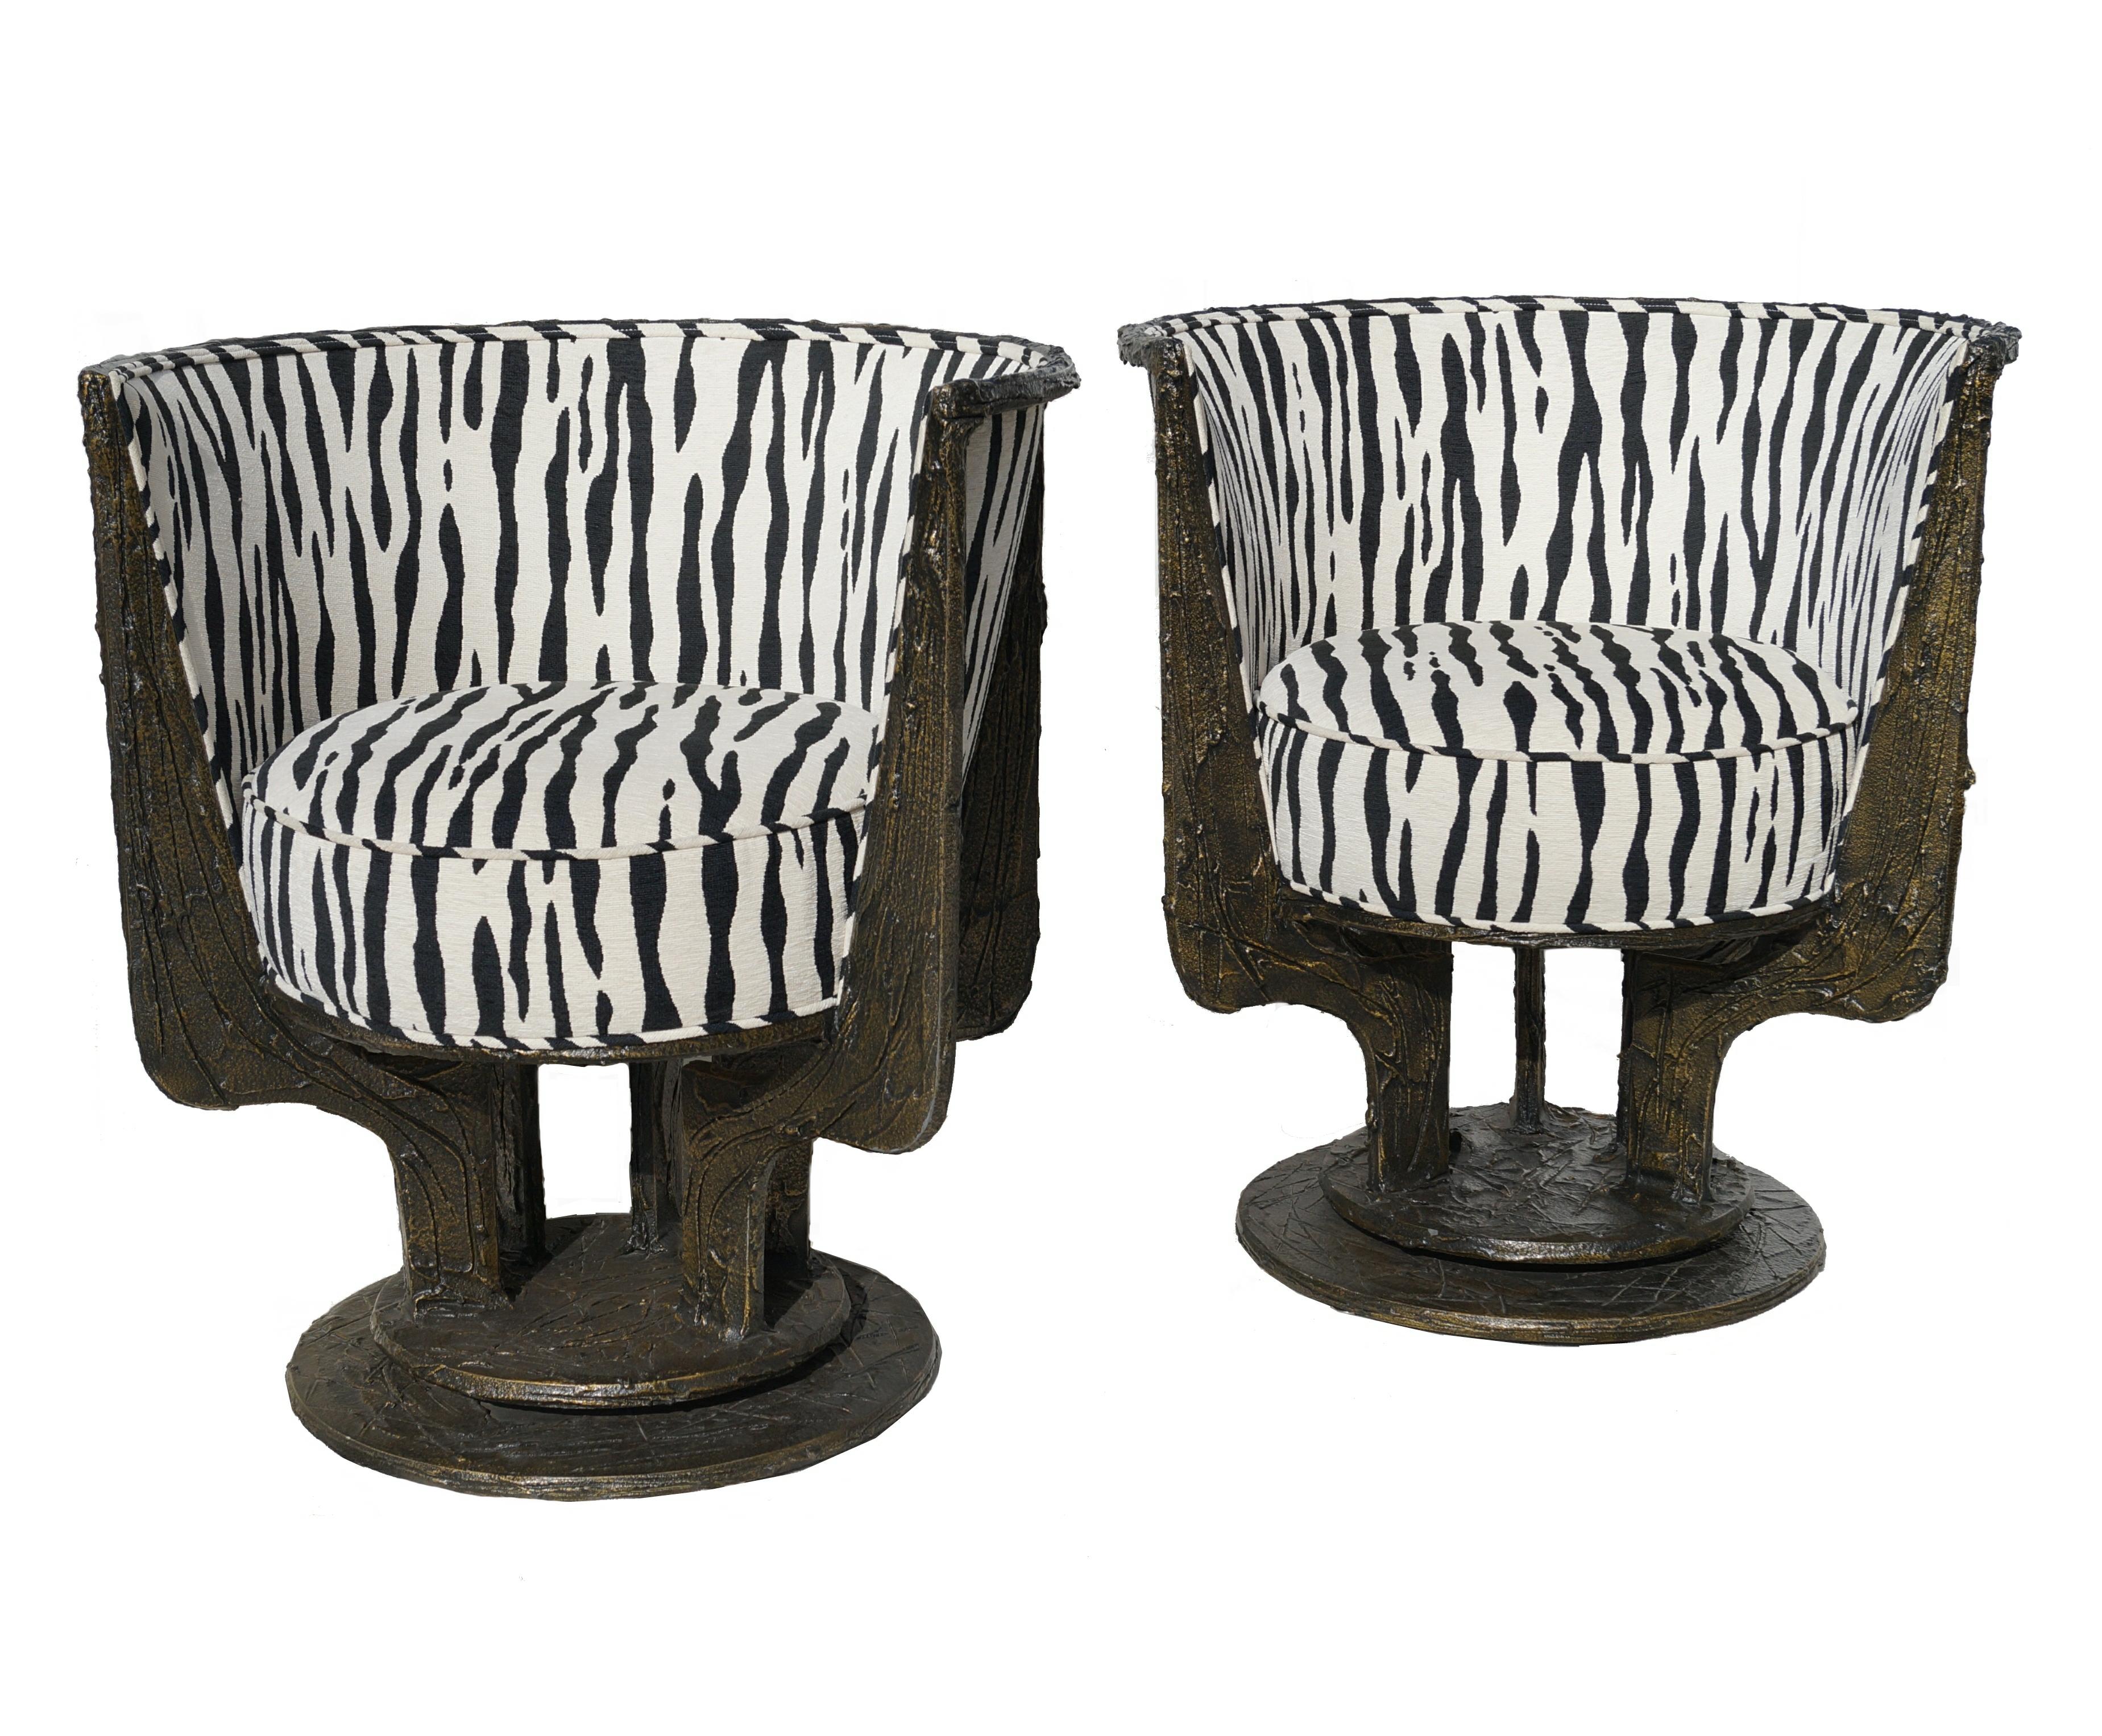 Pair or single Paul Evans sculpted bronze chairs.